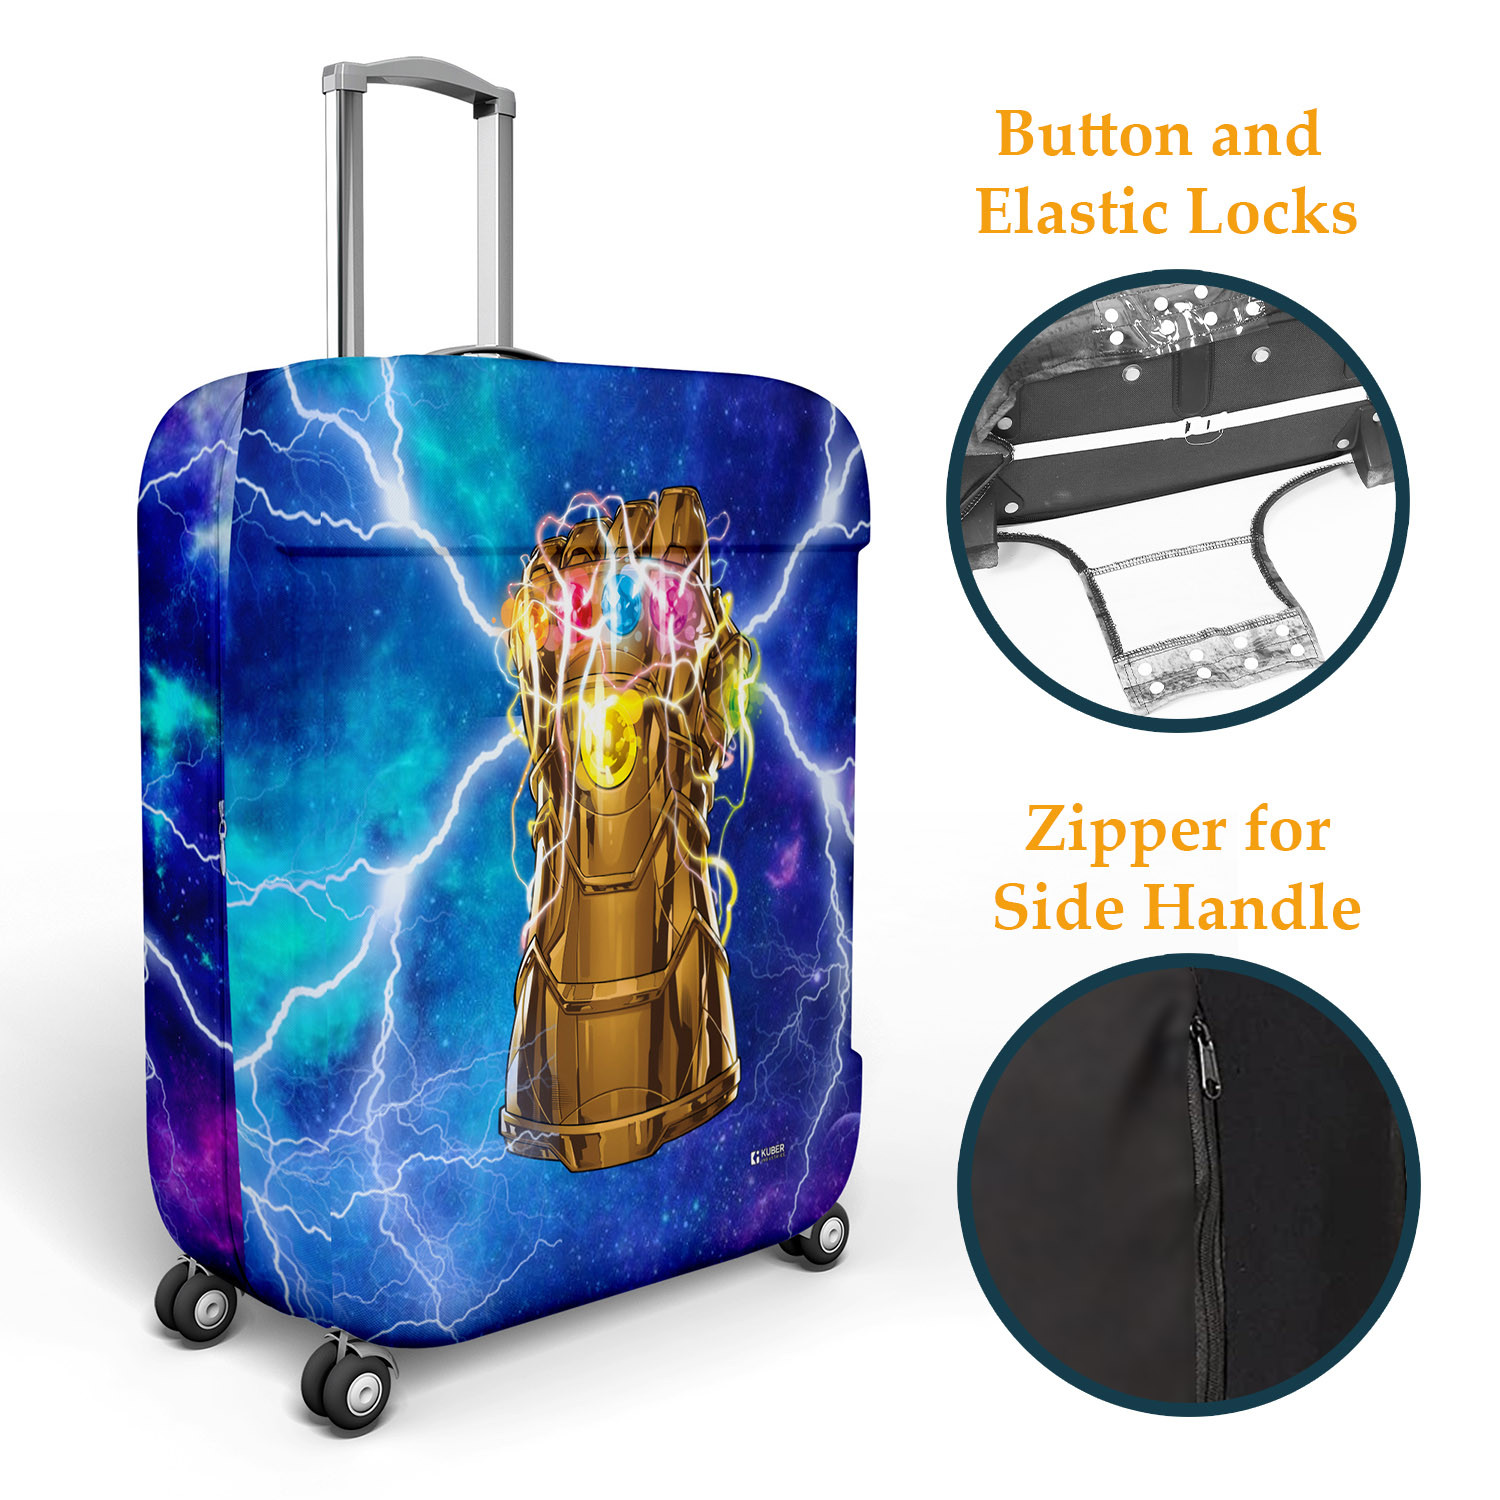 Kuber Industries Marvel The Infinity Gauntlet Luggage Cover|Polyester Travel Suitcase Cover|Washable|Stretchable Suitcase Protector|26-30 Inch|Large (Sky Blue)